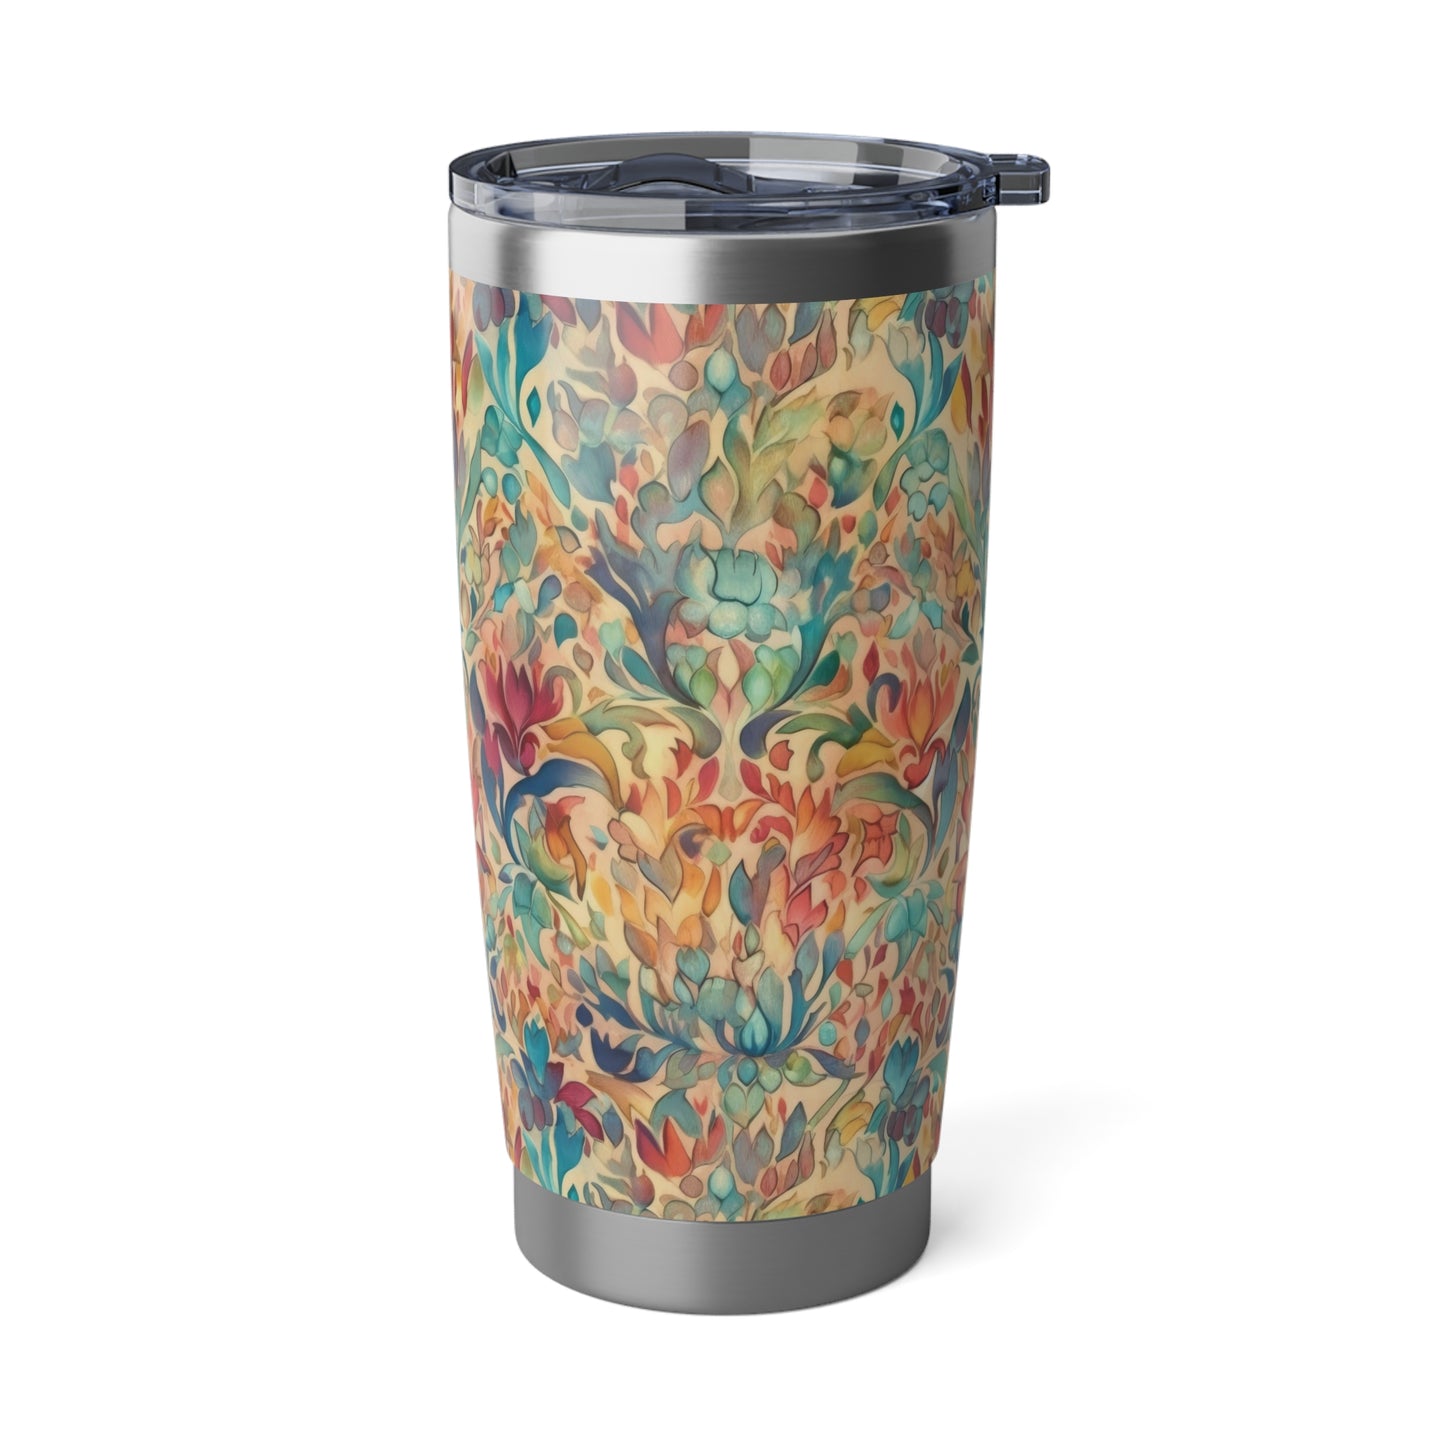 Tapestry Designs 2.5 - Vagabond 20oz Tumbler - Stainless Steel - Double Wall